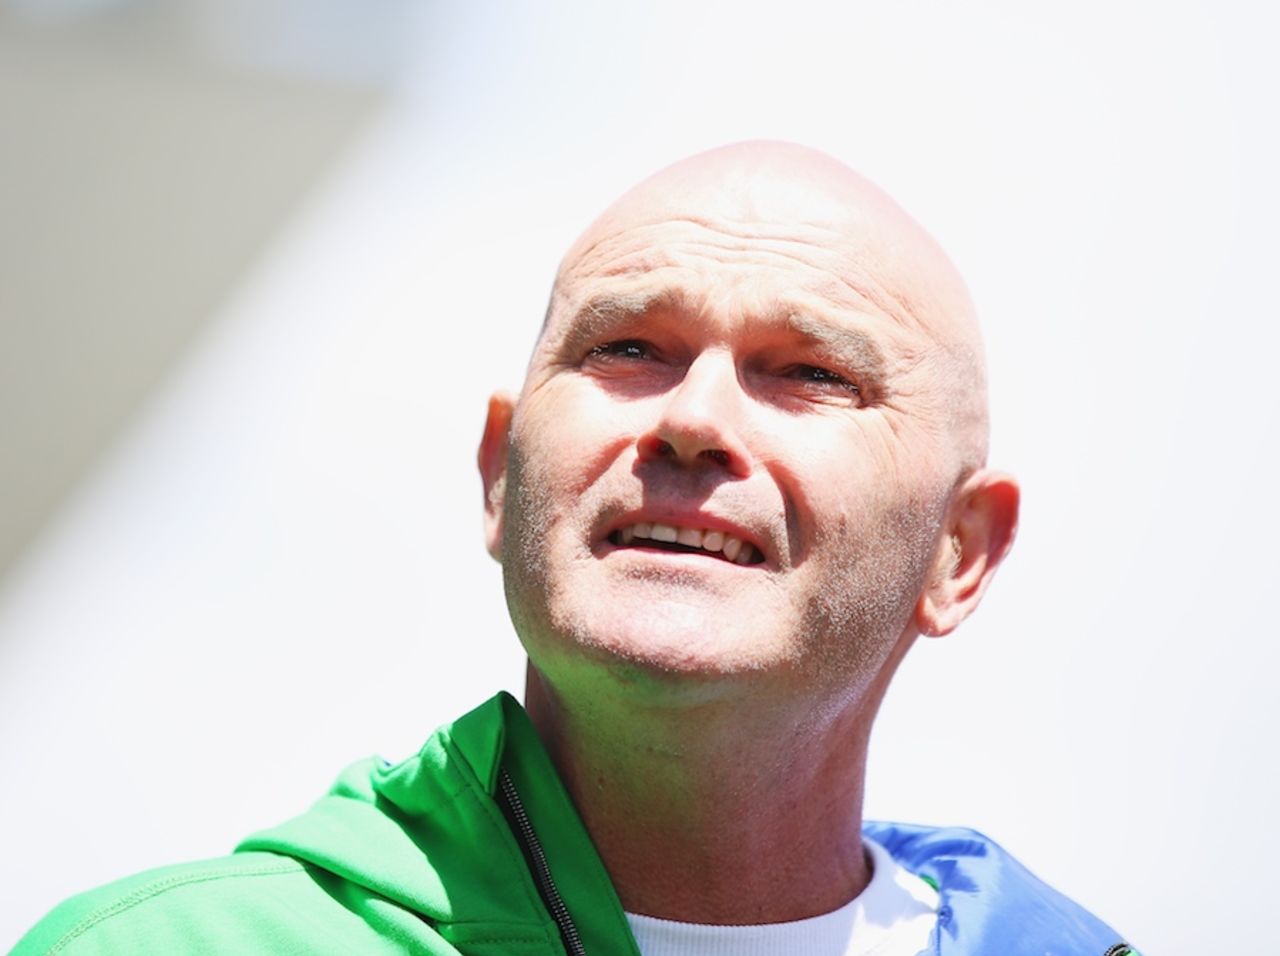 Martin Crowe was at Eden Park where he spoke to the media, Auckland, January 7, 2015